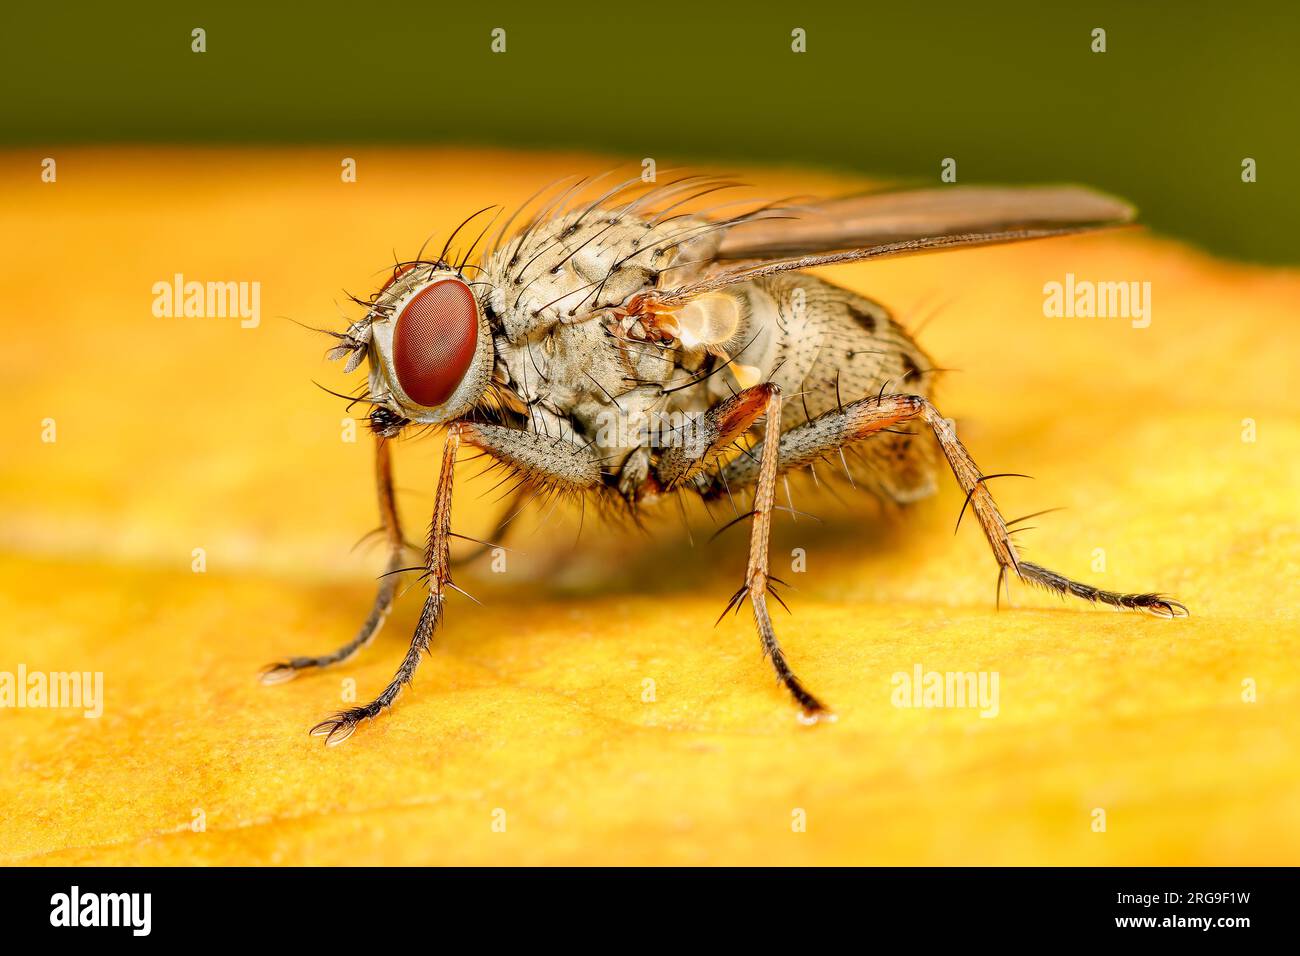 Macrophotograph of a small Muscidae fly resting on an orange leaf on a summer day Stock Photo